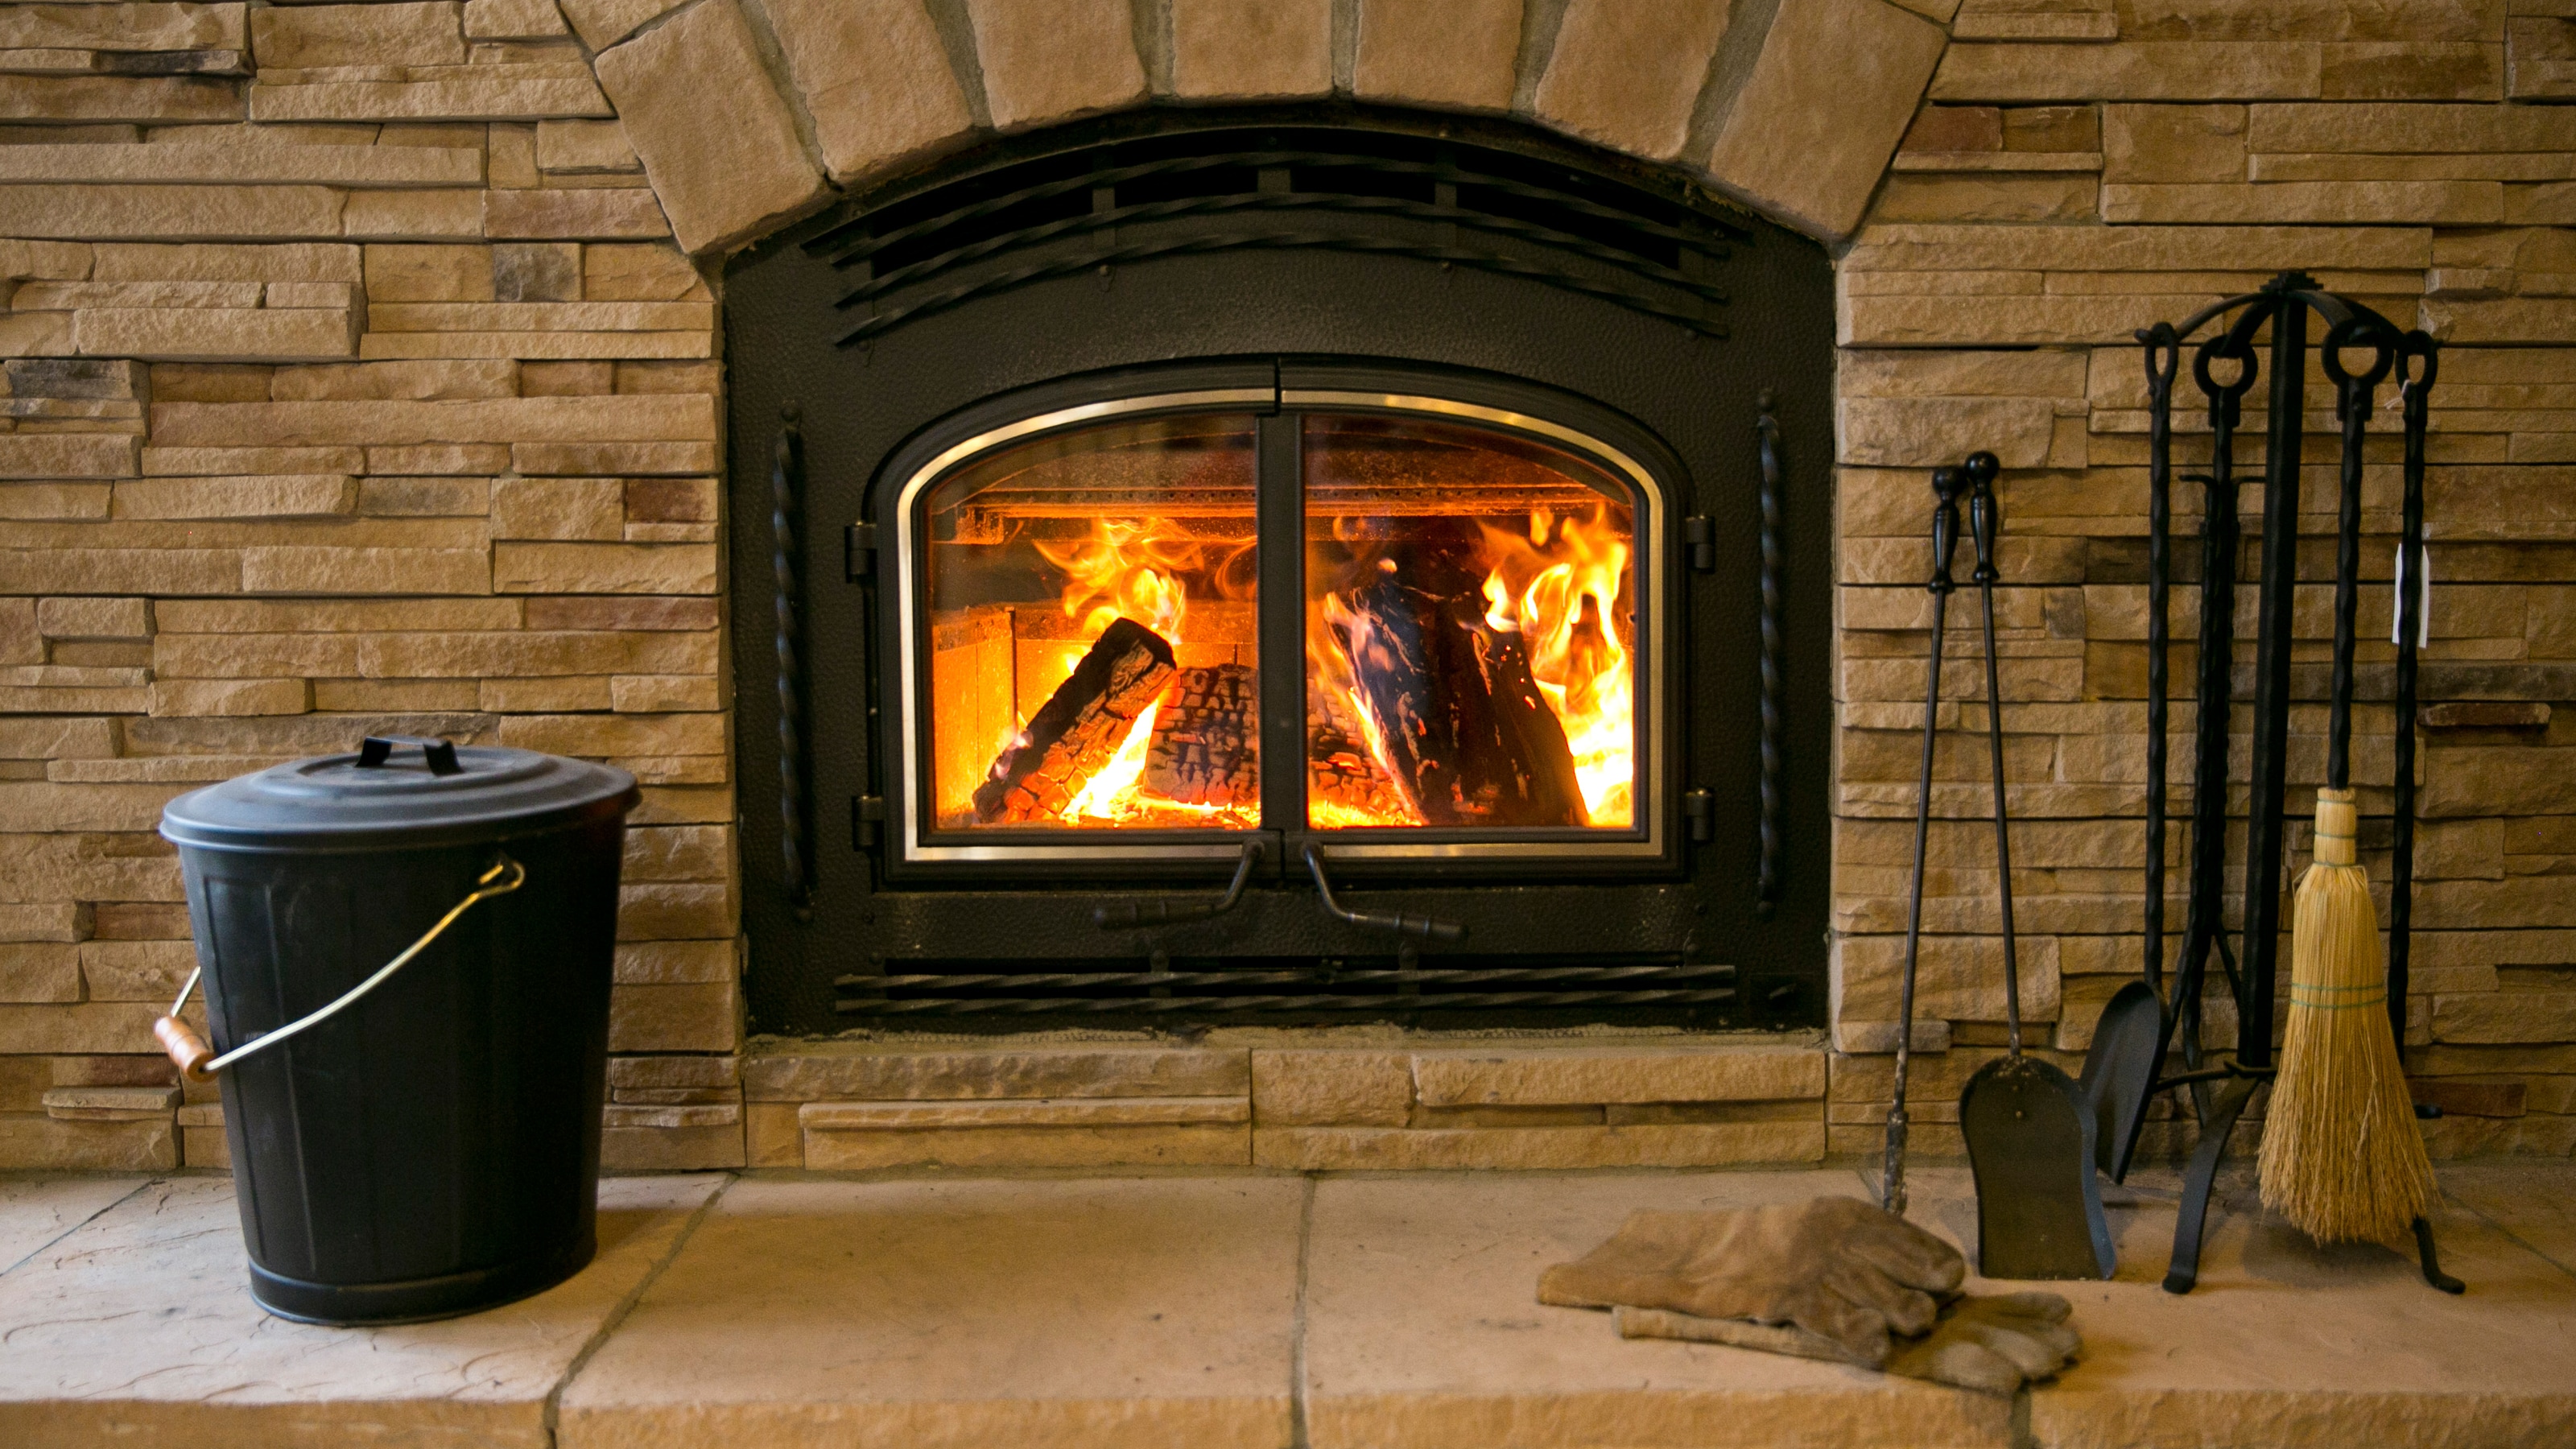 How to Install Fireplace Doors Beautiful How to Convert A Gas Fireplace to Wood Burning